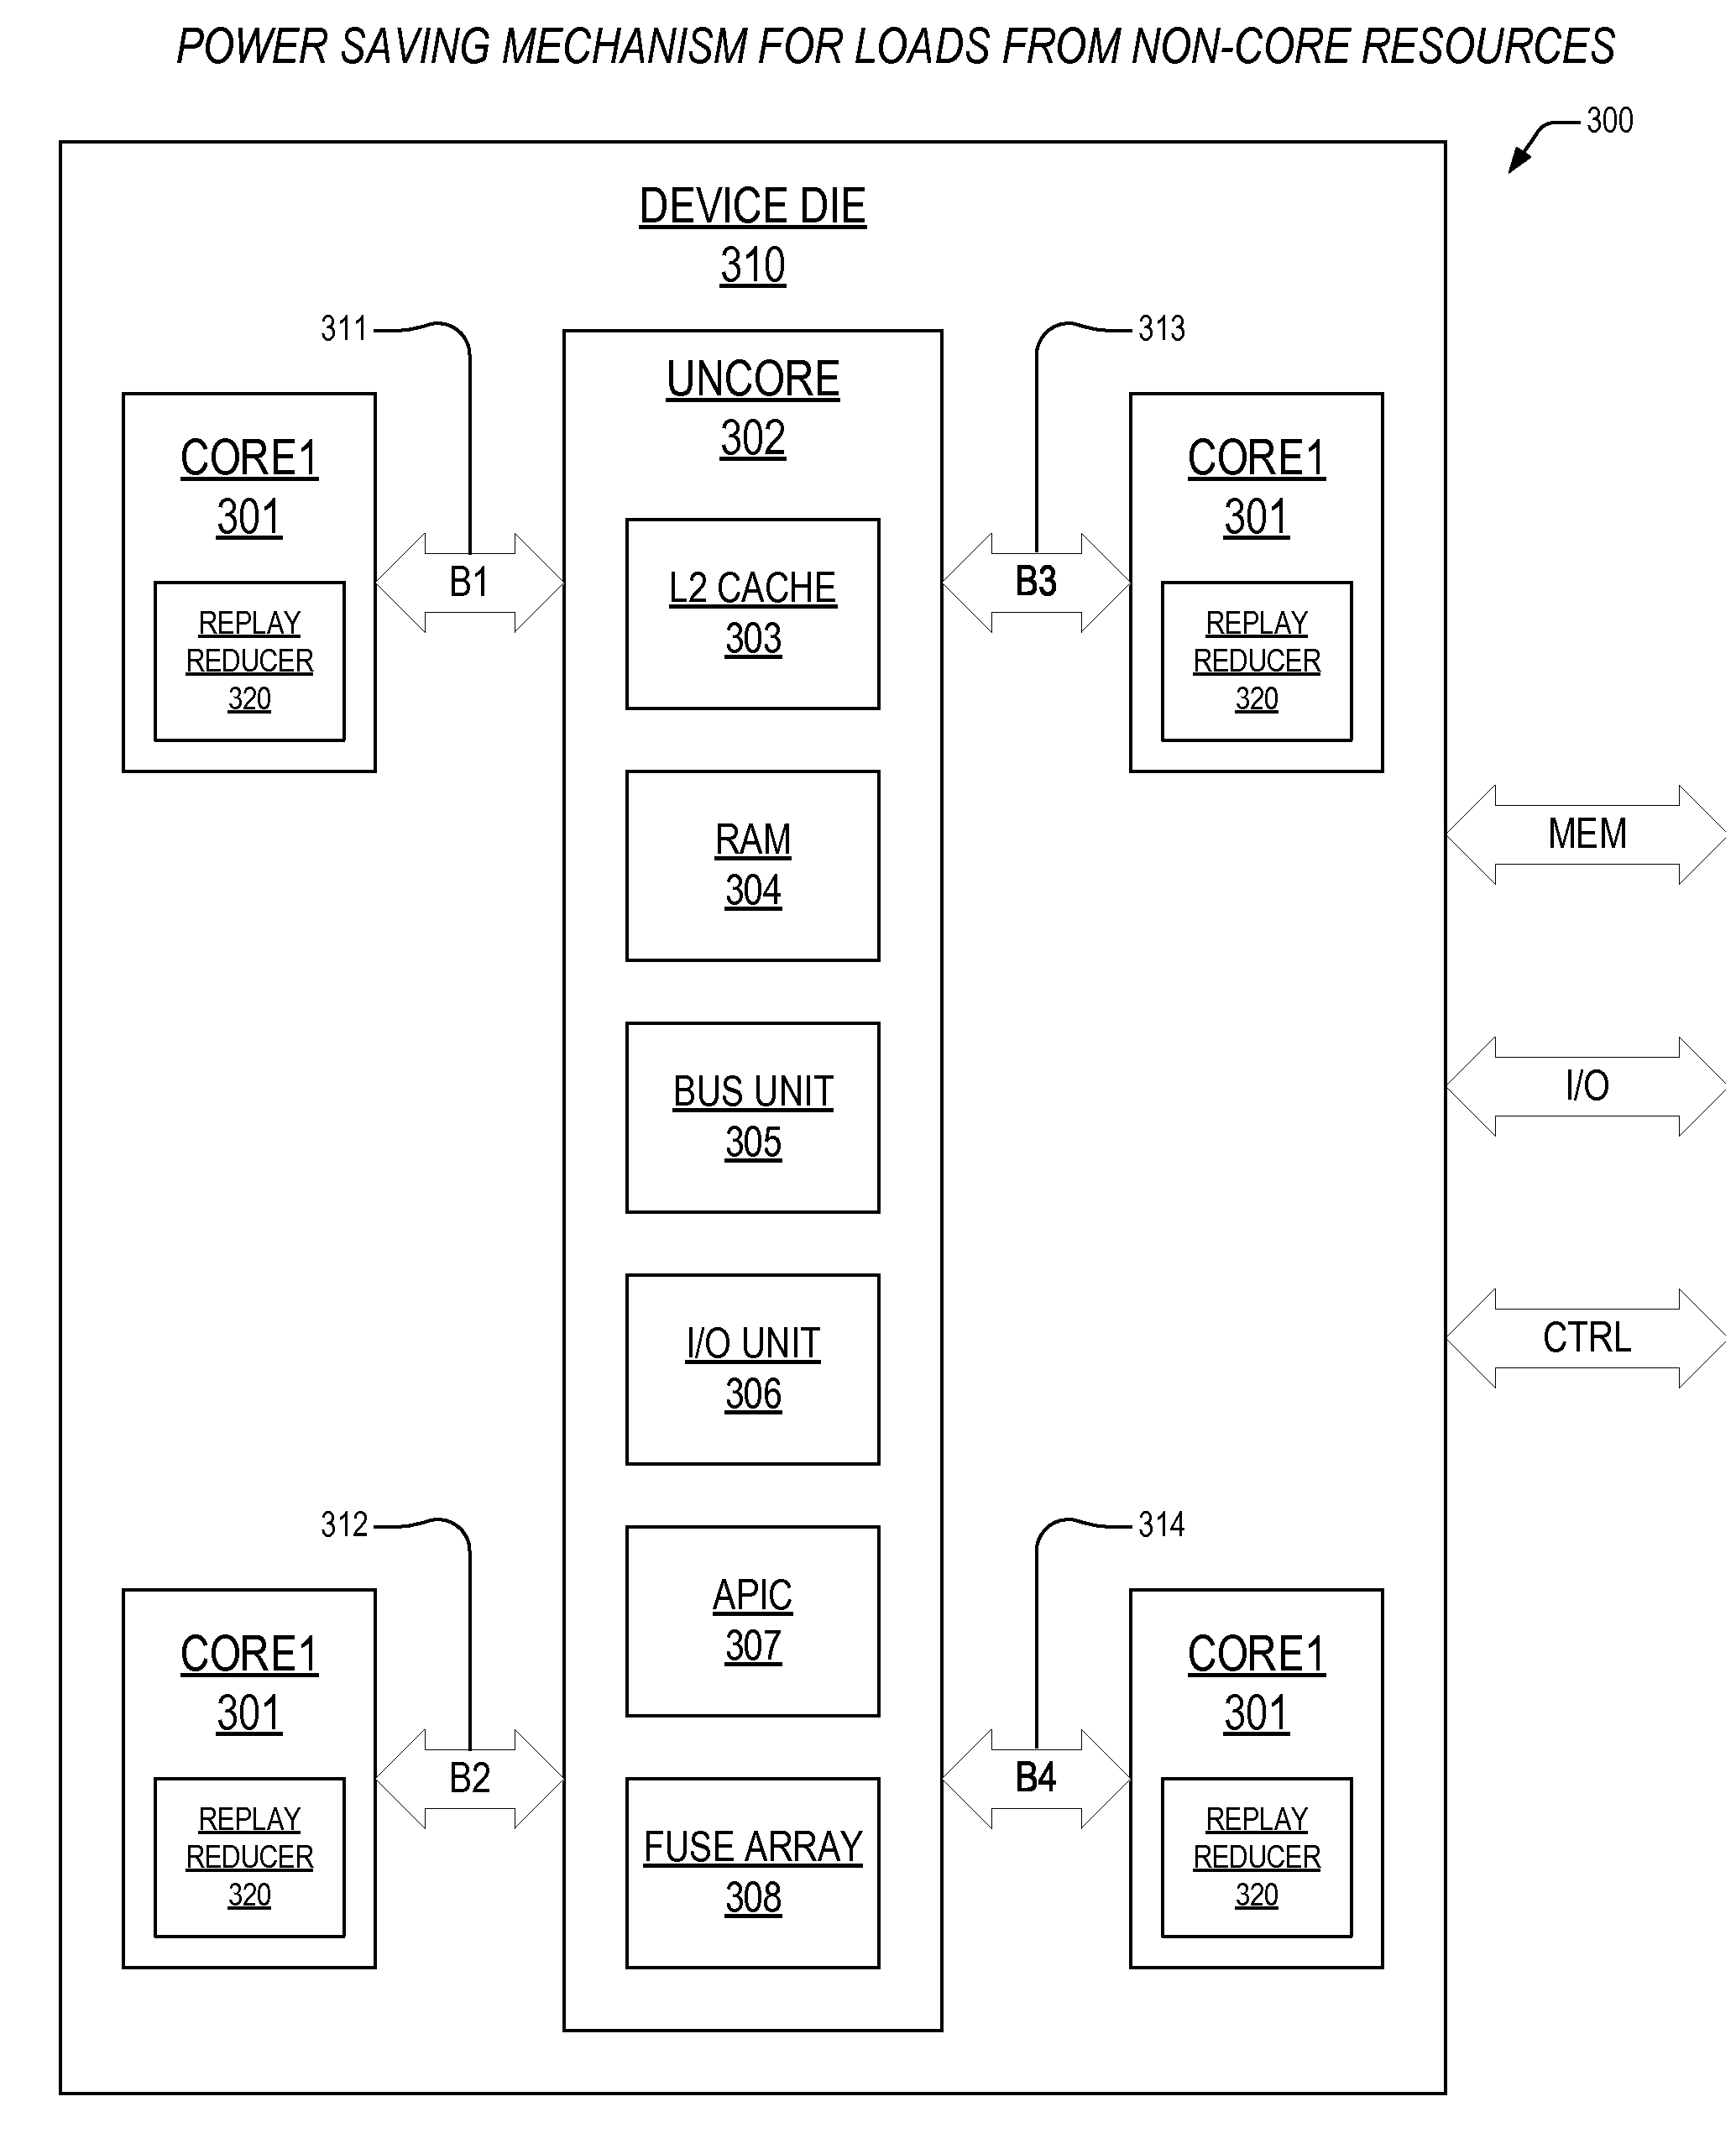 Power saving mechanism to reduce load replays in out-of-order processor